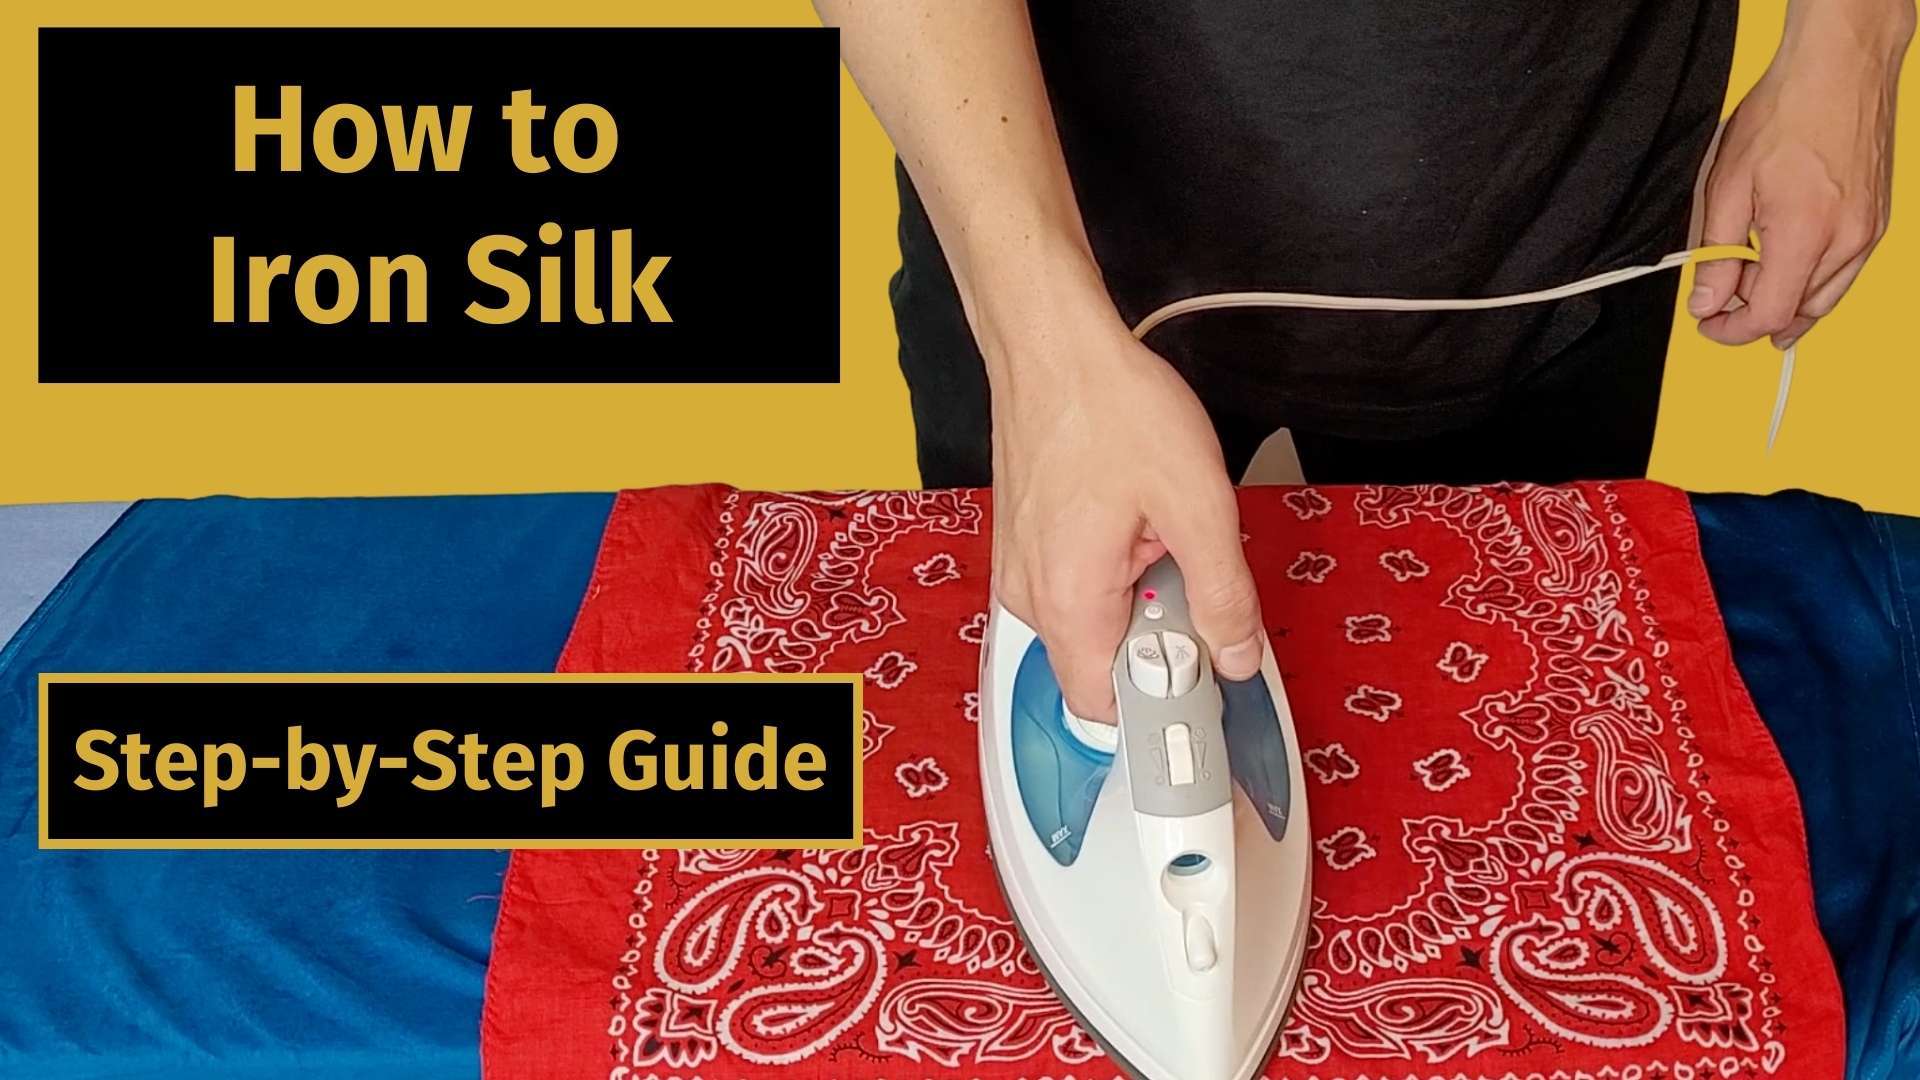 how to iron silk banner image with a picture of a man ironing a green silk garment on an ironing board